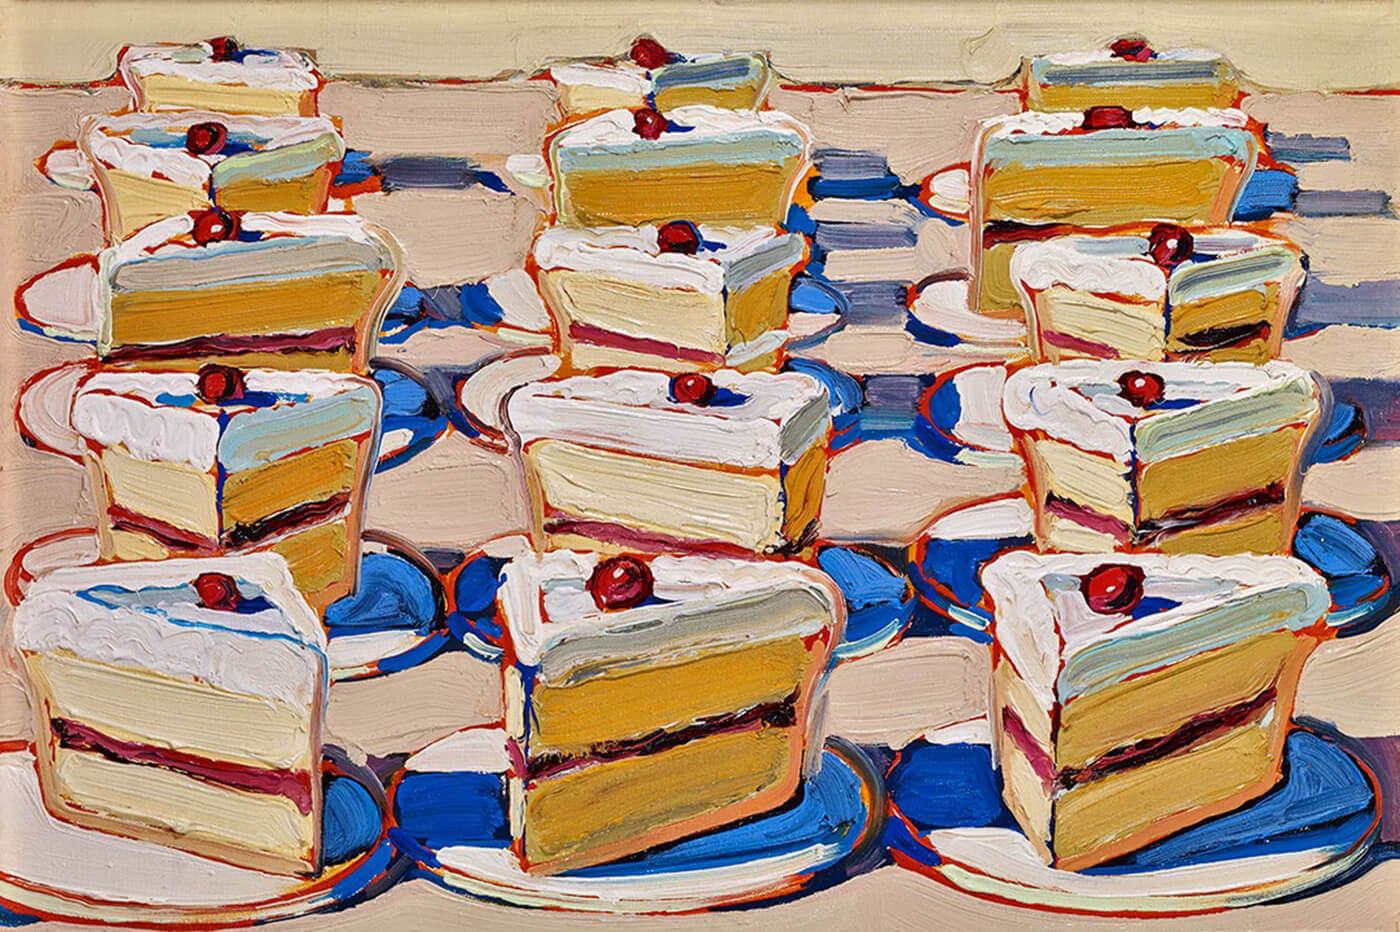 Wayne Thiebaud's Boston Cremes painting featuring lined up plates holding slices of Boston Creme cake with cherries on top.